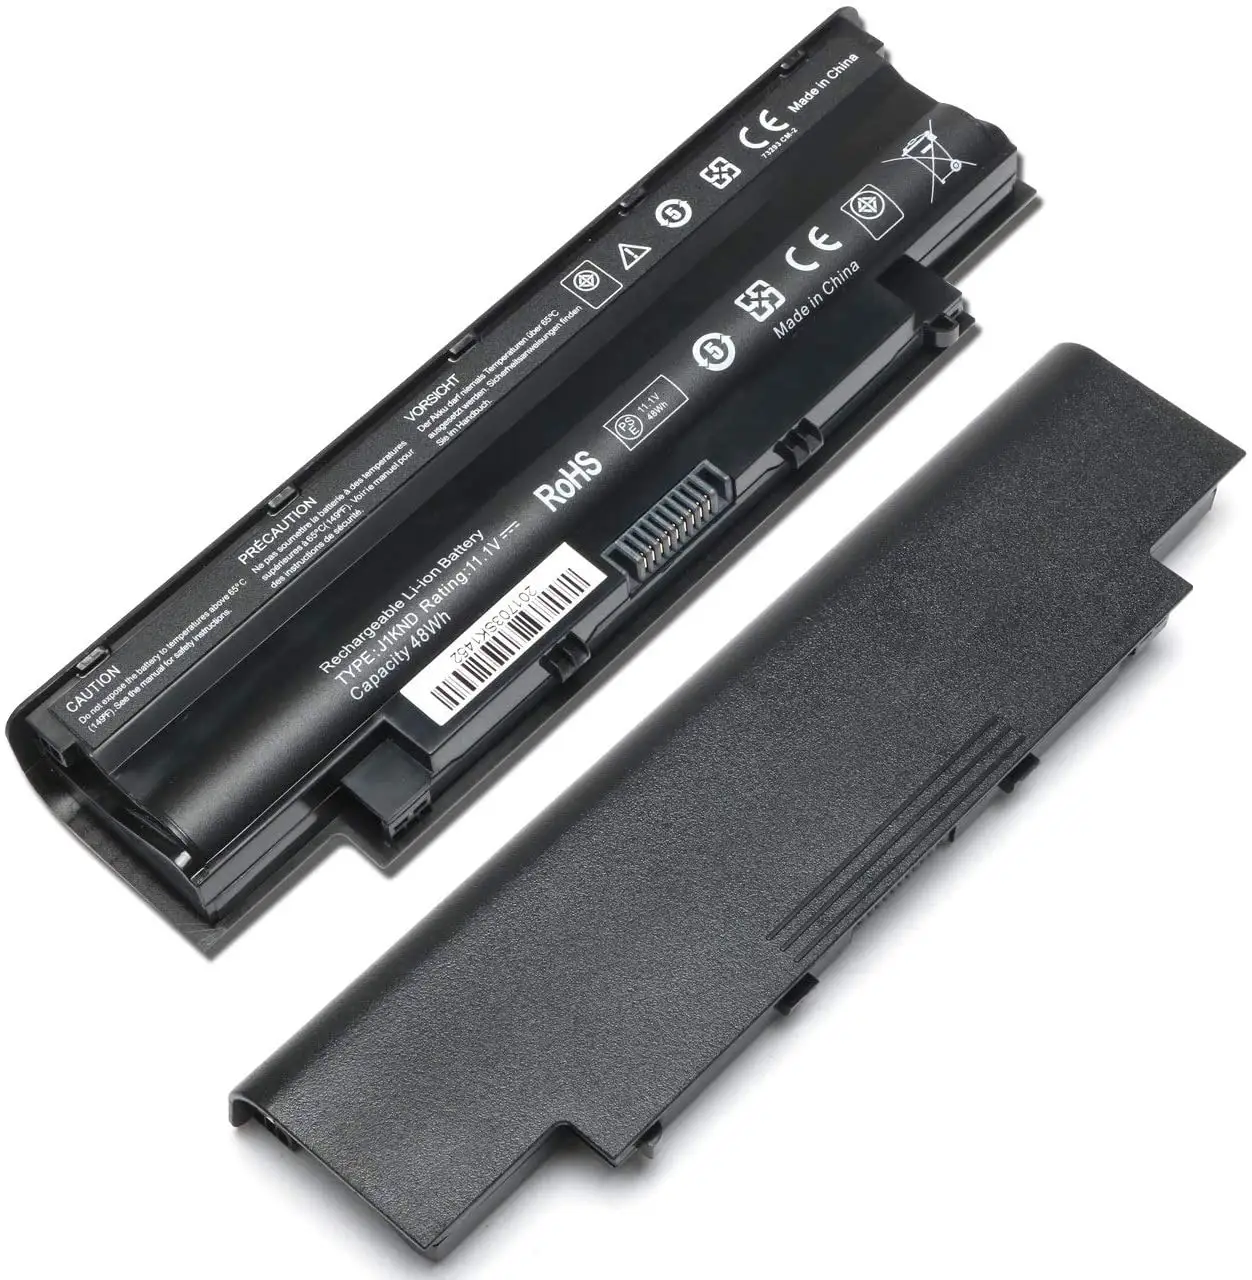 Replacement Laptop Battery for Dell J1KND battery Inspiron N4010 3010 N4010 N5010 13R 14R 15R 4010 notebook battery